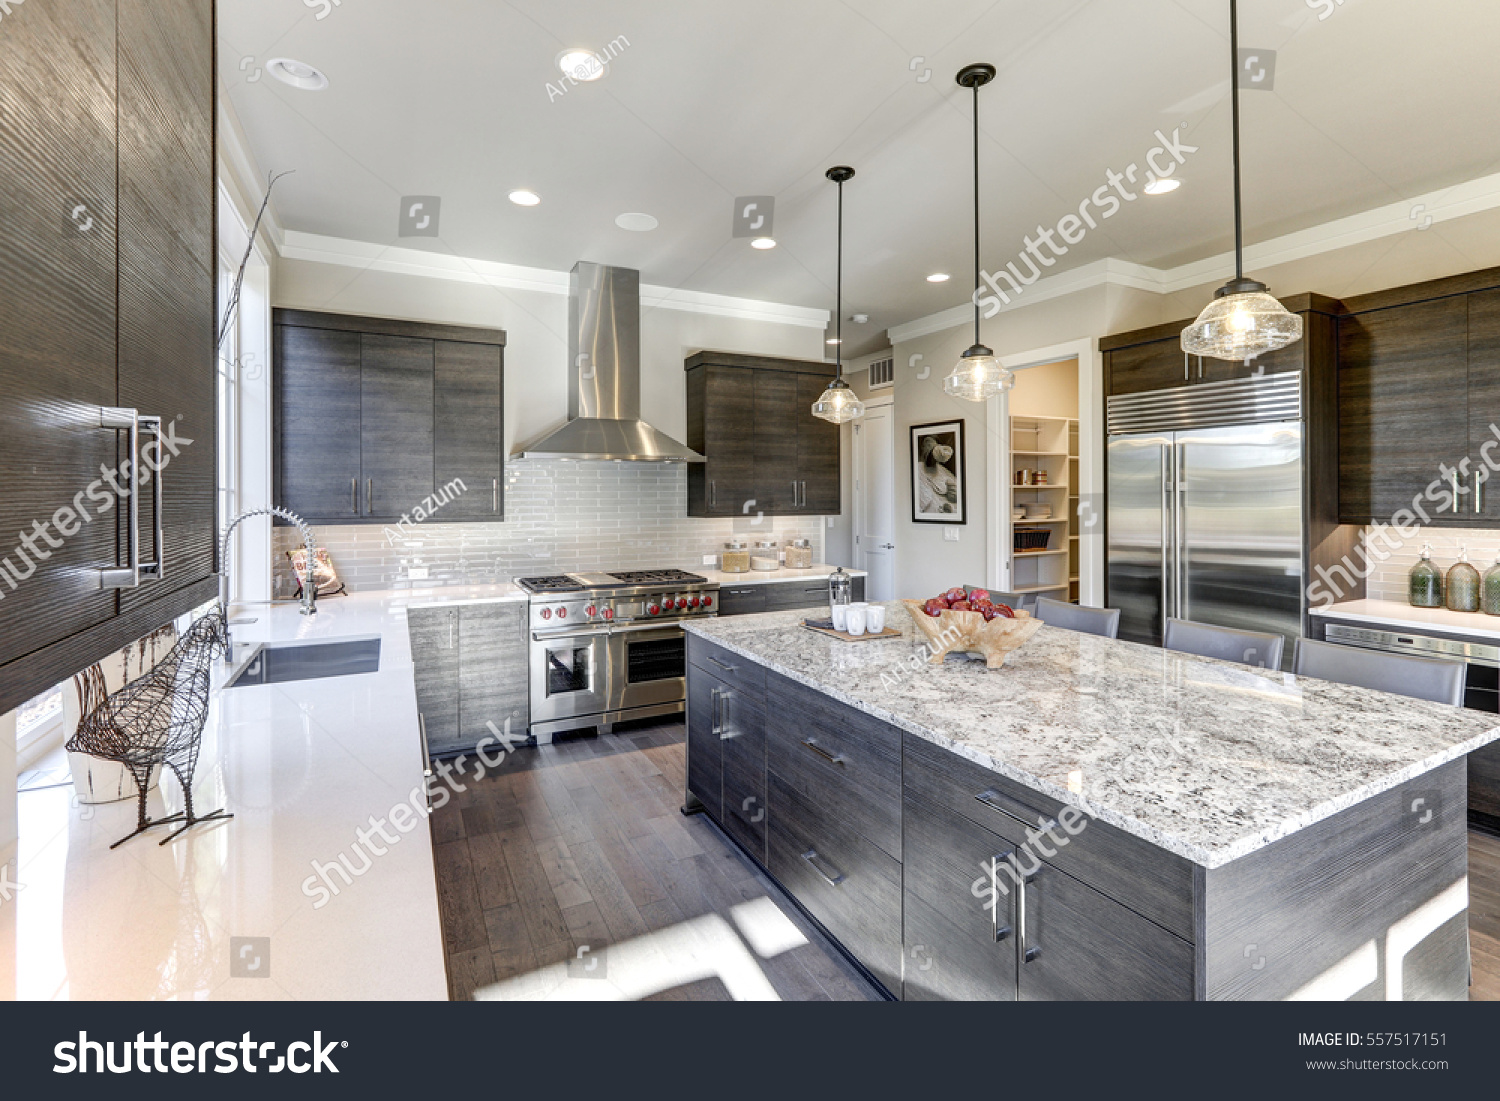 Modern Gray Kitchen Features Dark Gray Buildings Landmarks Stock Image 557517151,Flowering House Plants Pictures And Names